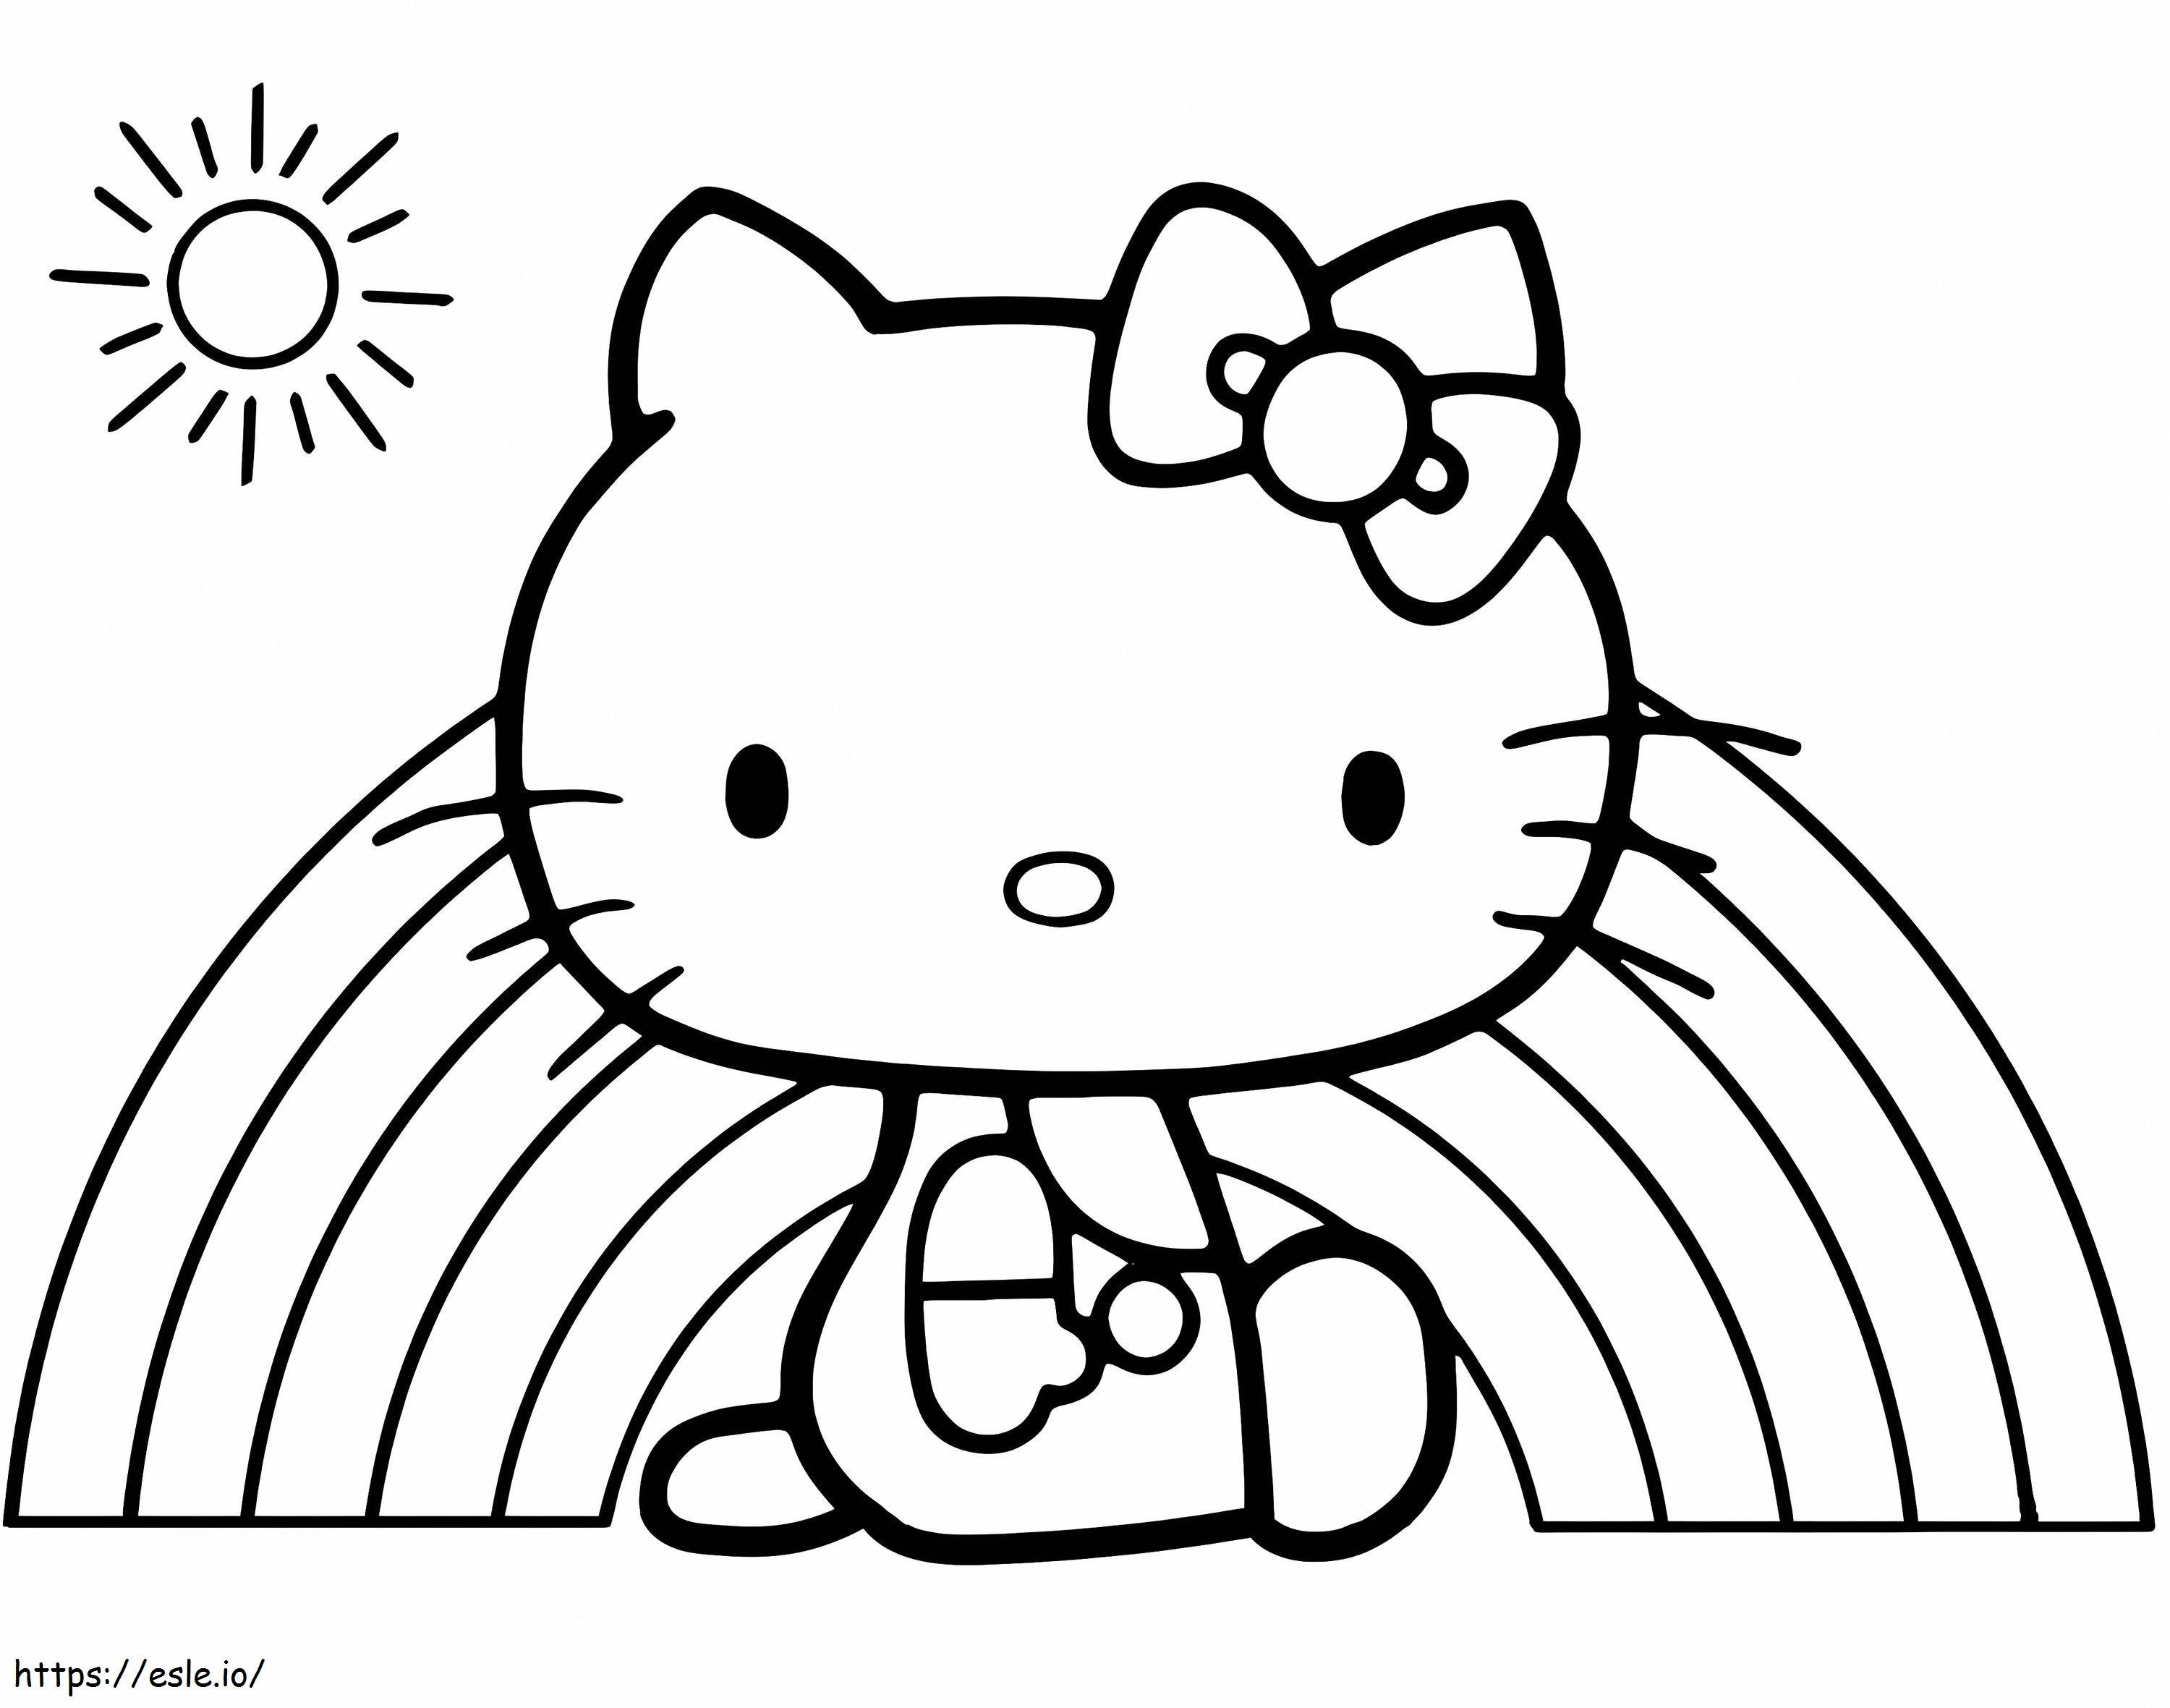 441D0729C9A194532449F594983F7Cf0_Hello Kitty Hello Kitty Throughout _1024 724 coloring page